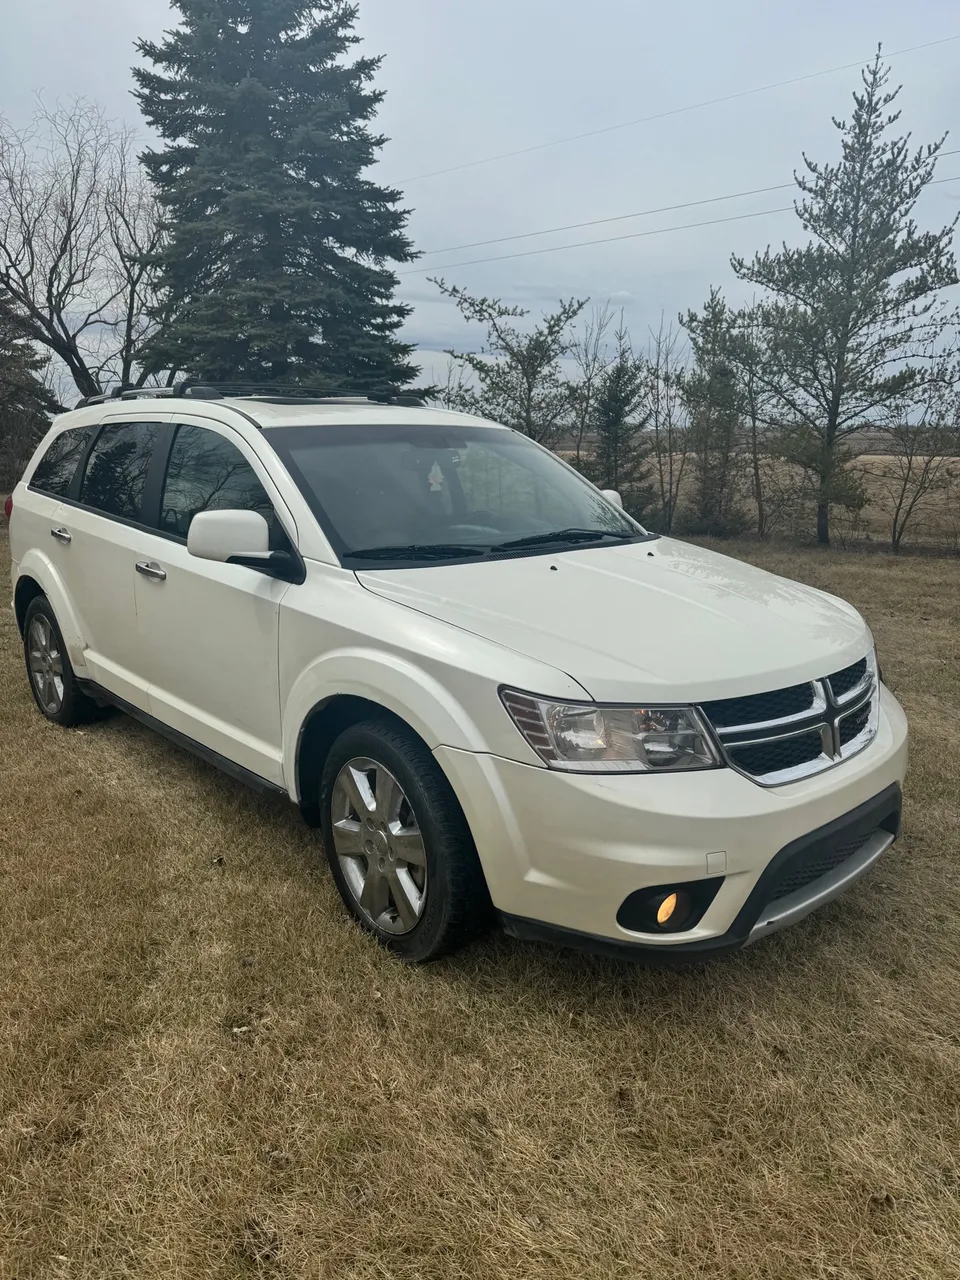 2013 DODGE JOURNEY AWD CLEAN TITLE SAFETIED $10,950